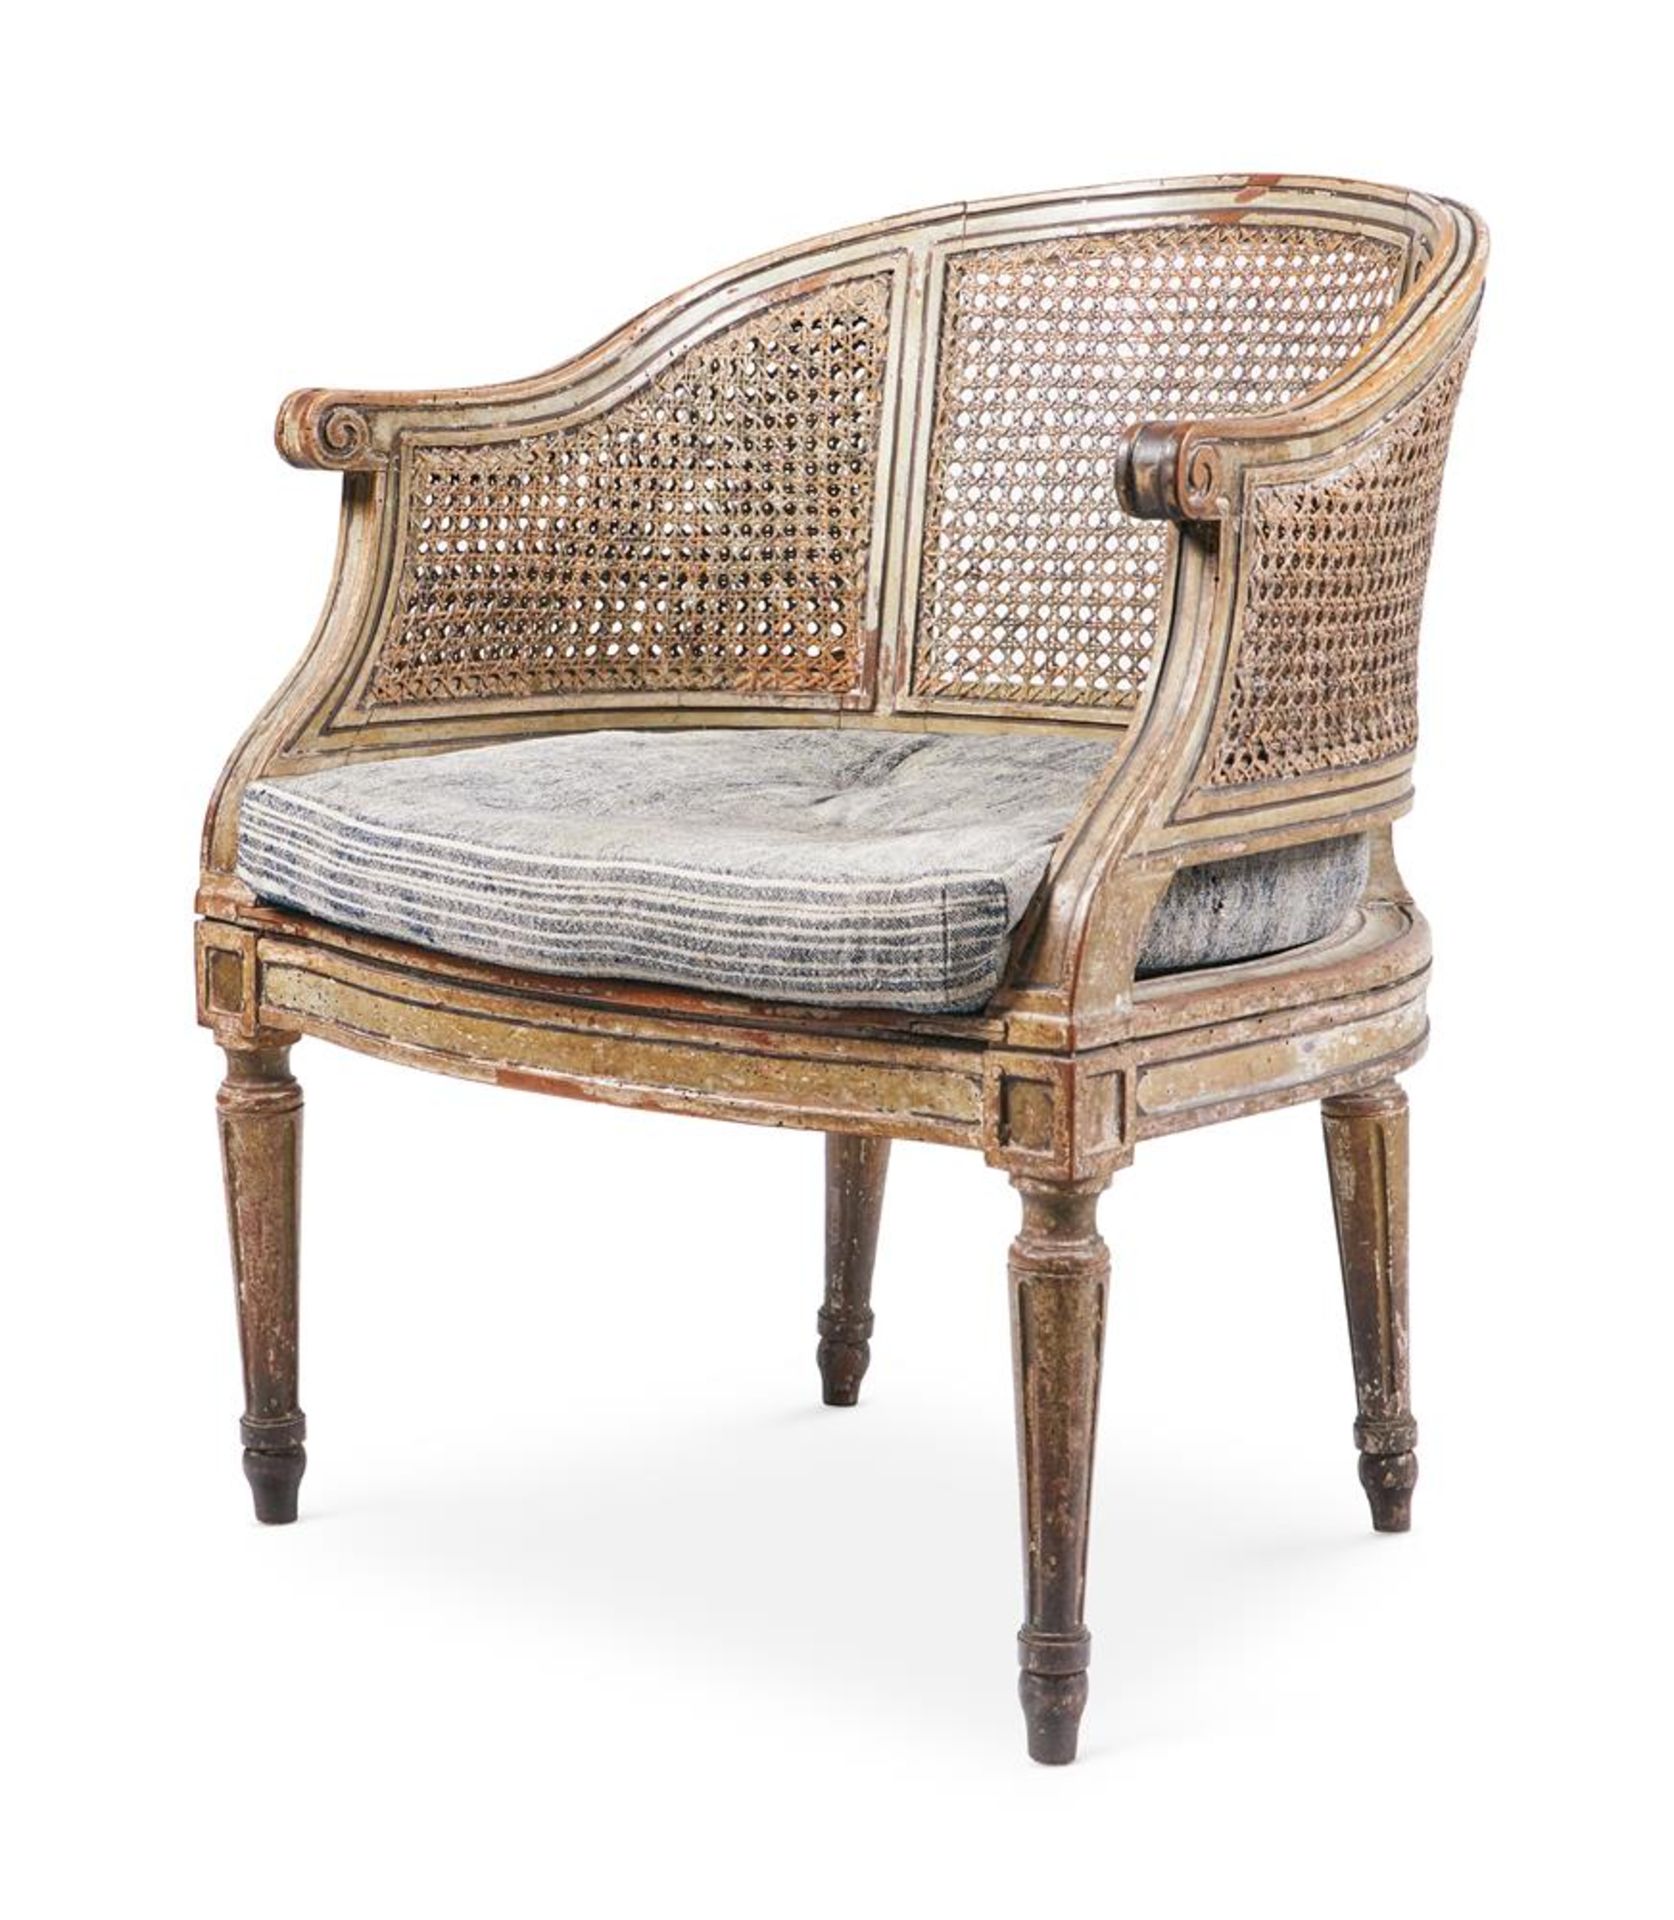 A LOUIS XVI PAINTED WALNUT BERGERE ARMCHAIR, LATE 18TH CENTURY - Image 2 of 6